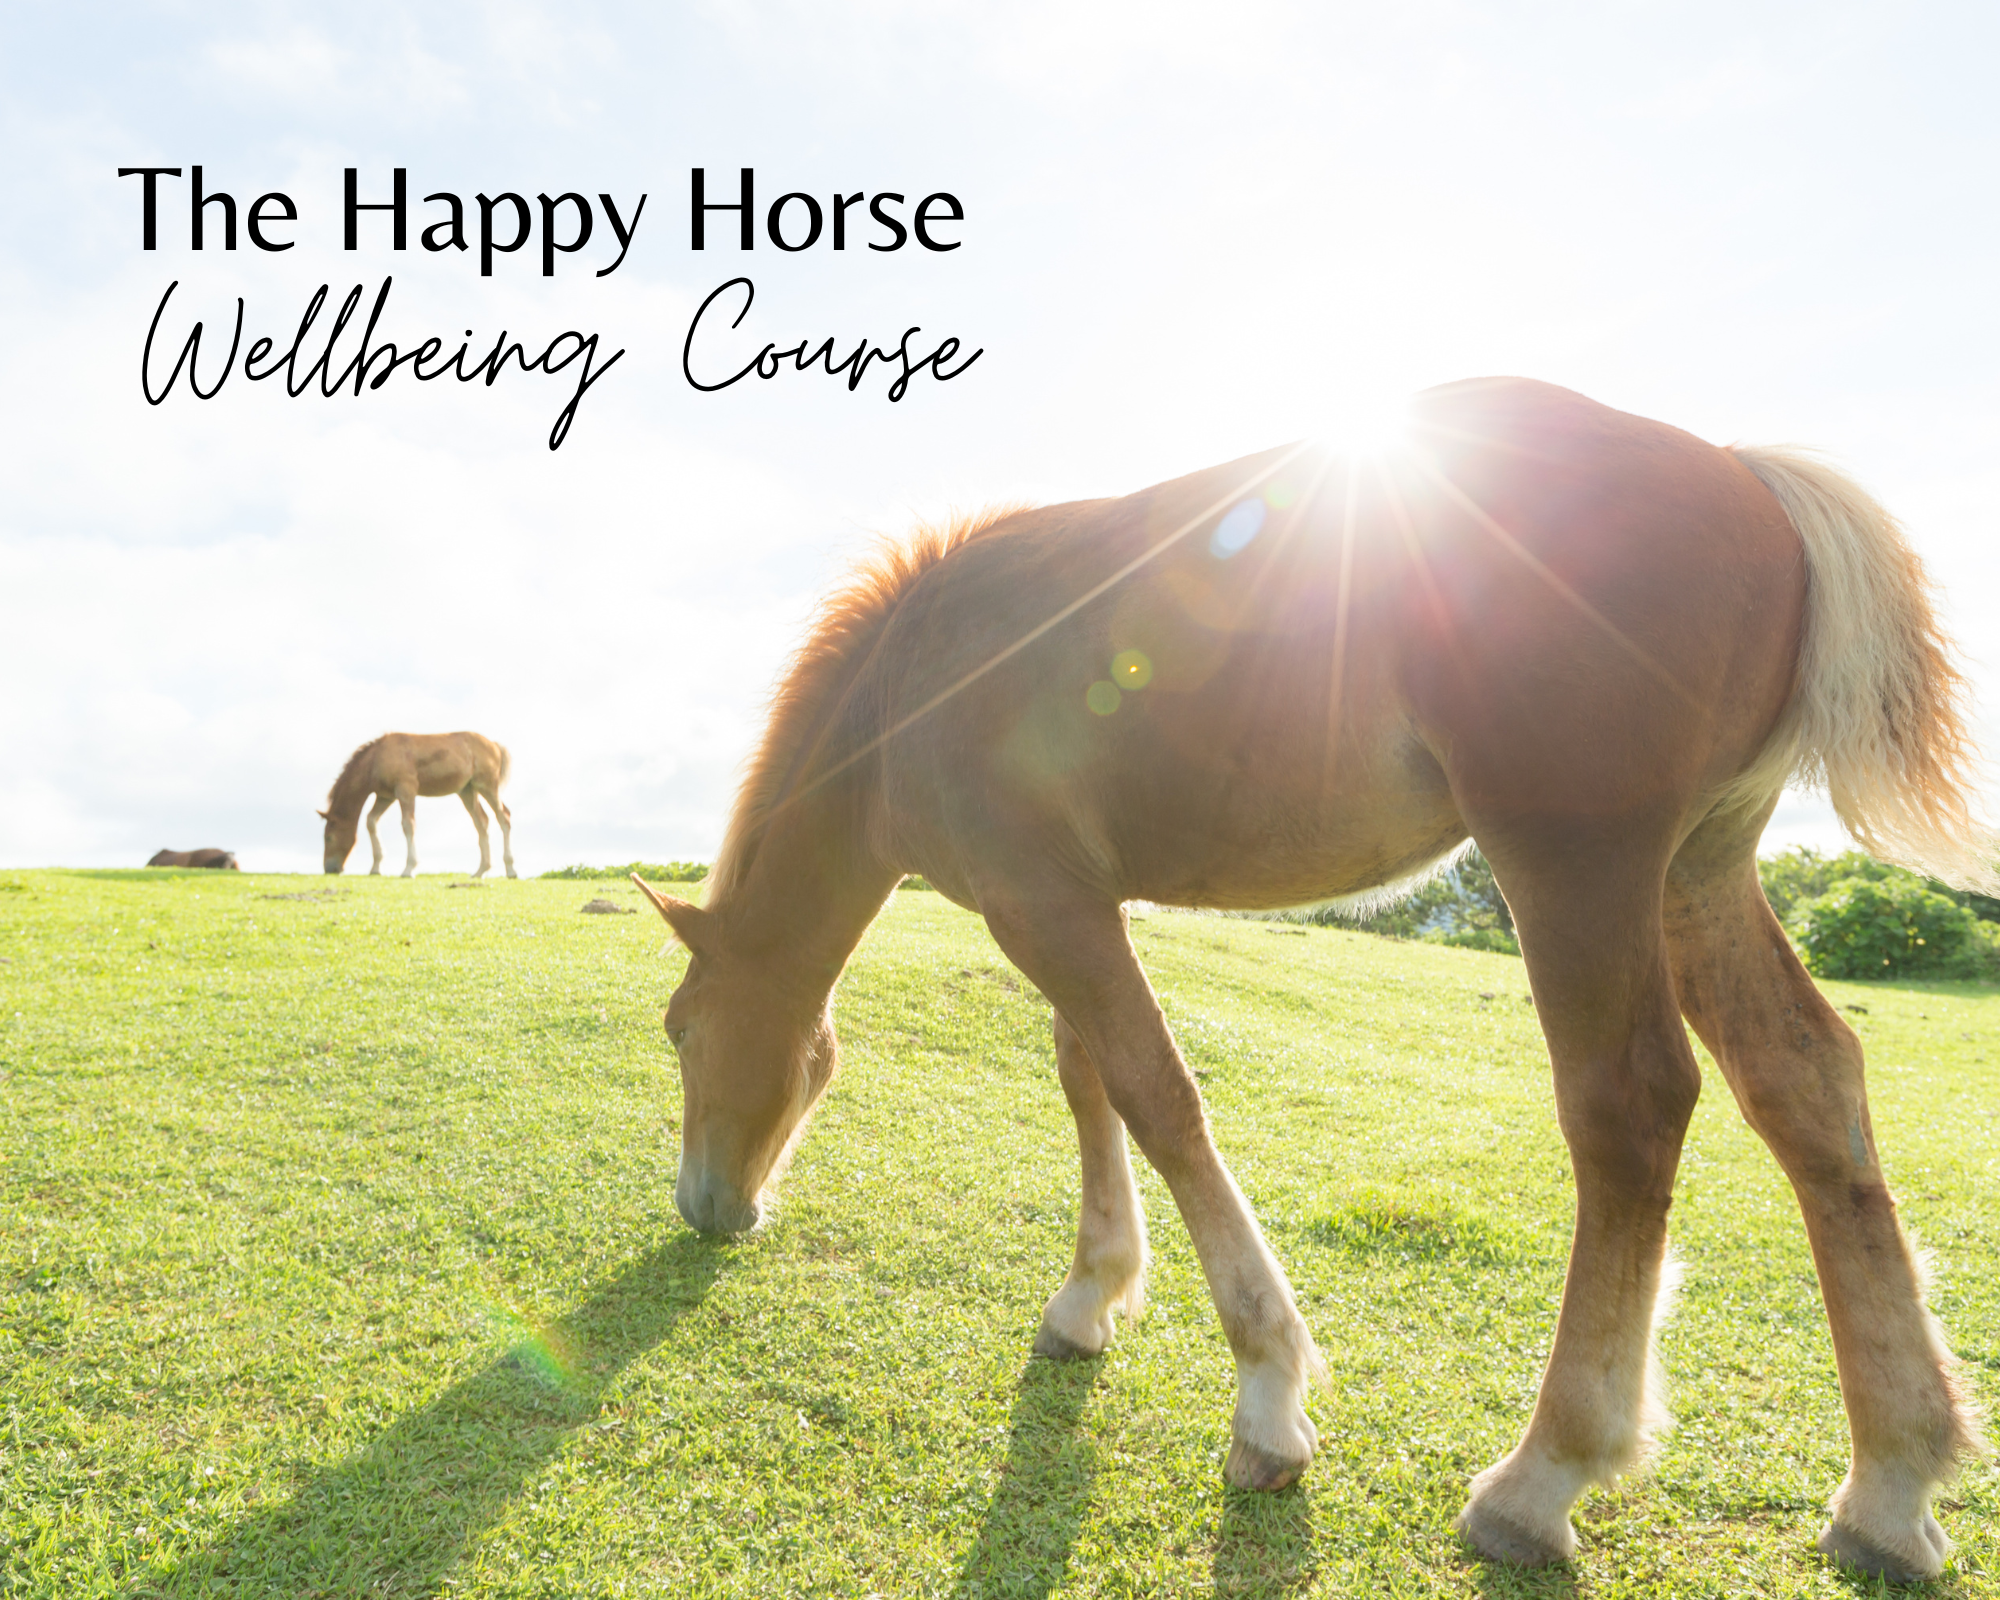 The Happy Horse Wellbeing Course